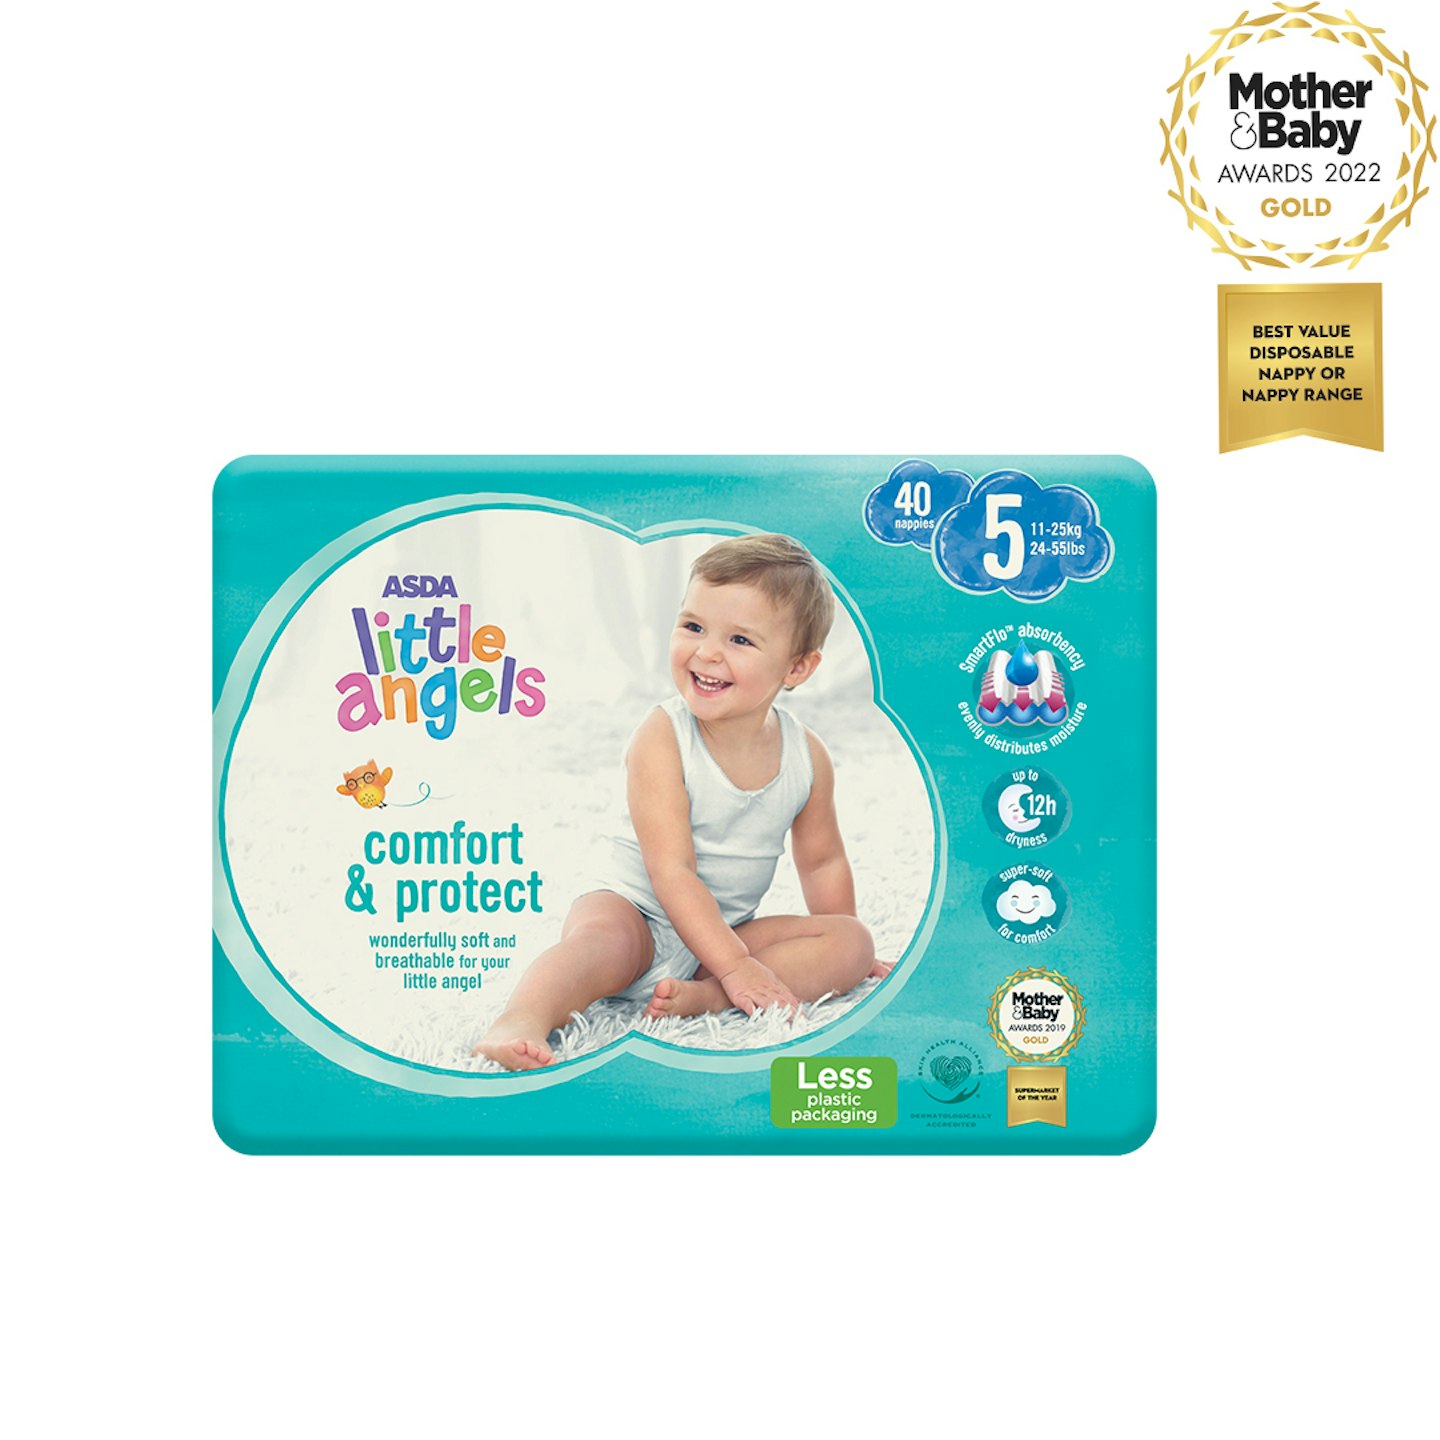 Little Angels Comfort & Protect Nappies from Asda